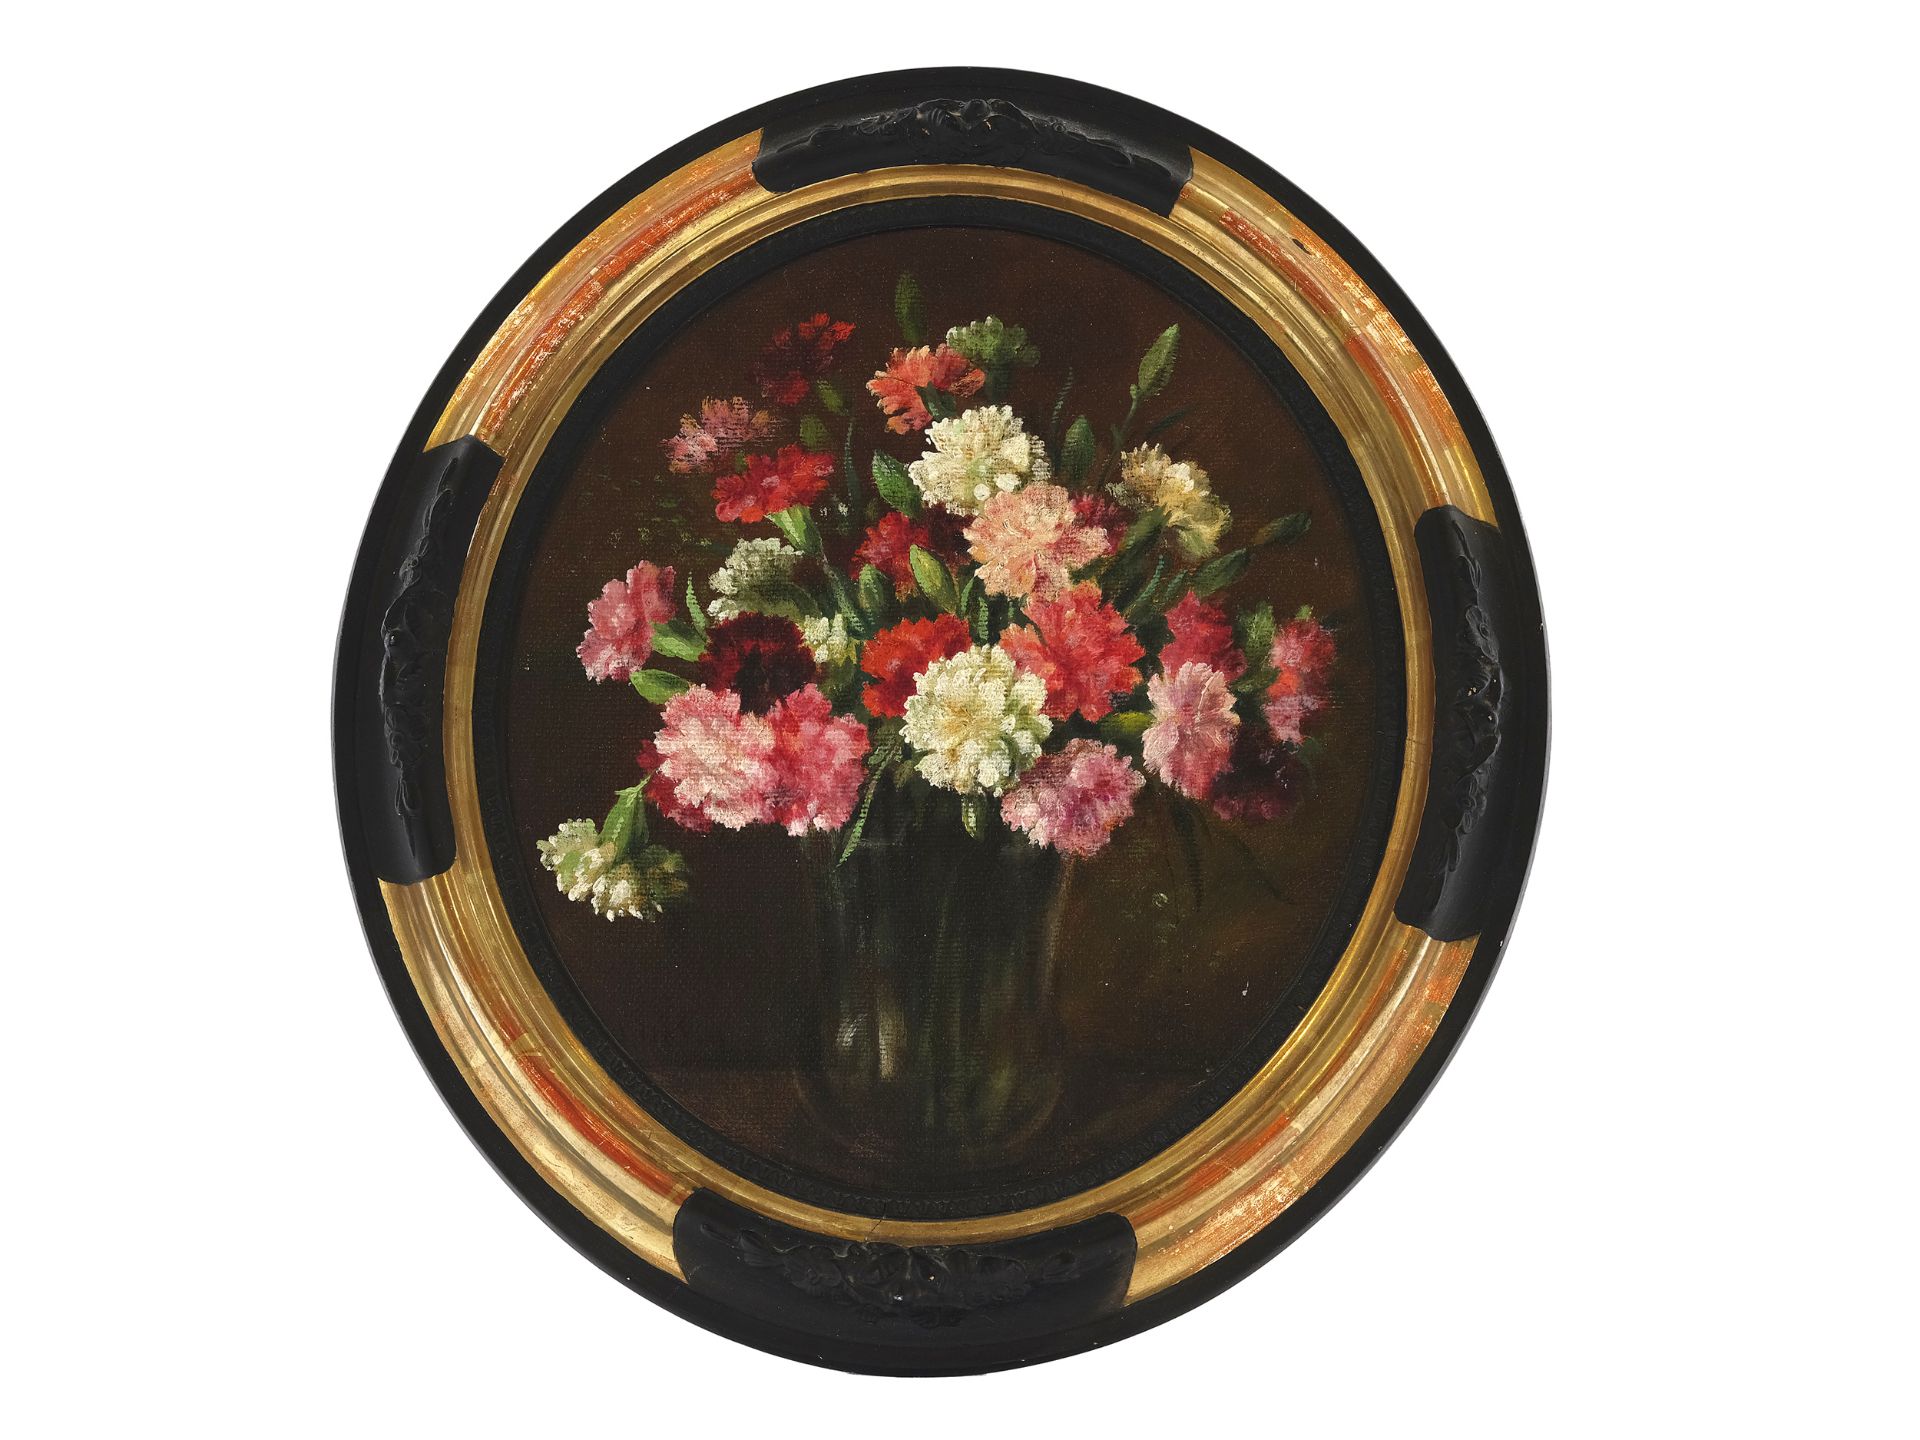 Pair of oval floral still lives, around 1900/20 - Image 4 of 5